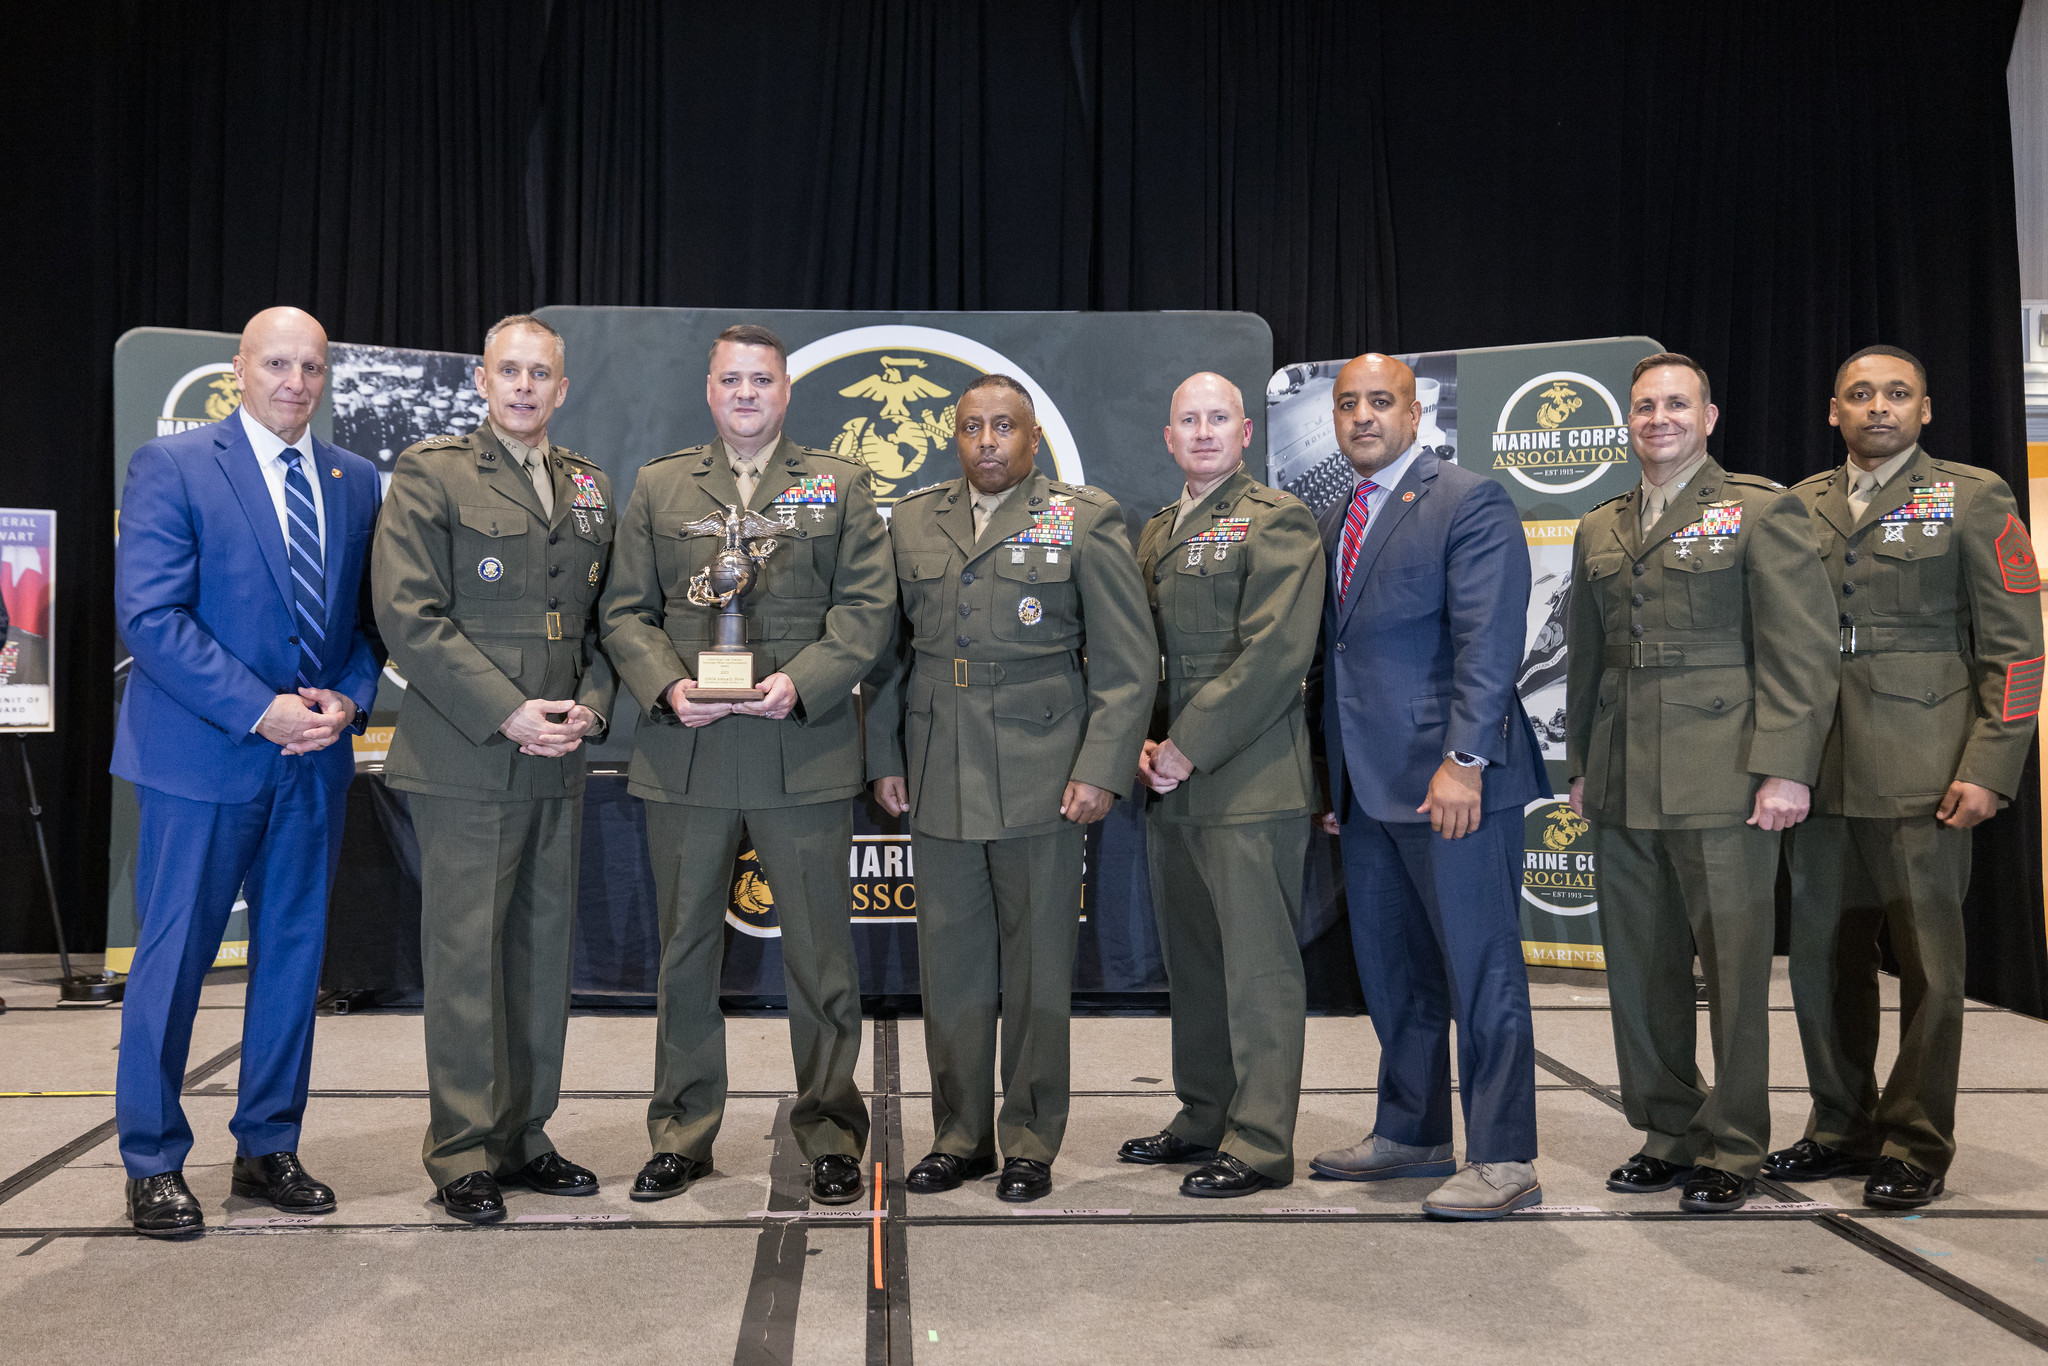 CEO Edwin "Eddie" Peña posing on a stage with group of Marines during award ceremony